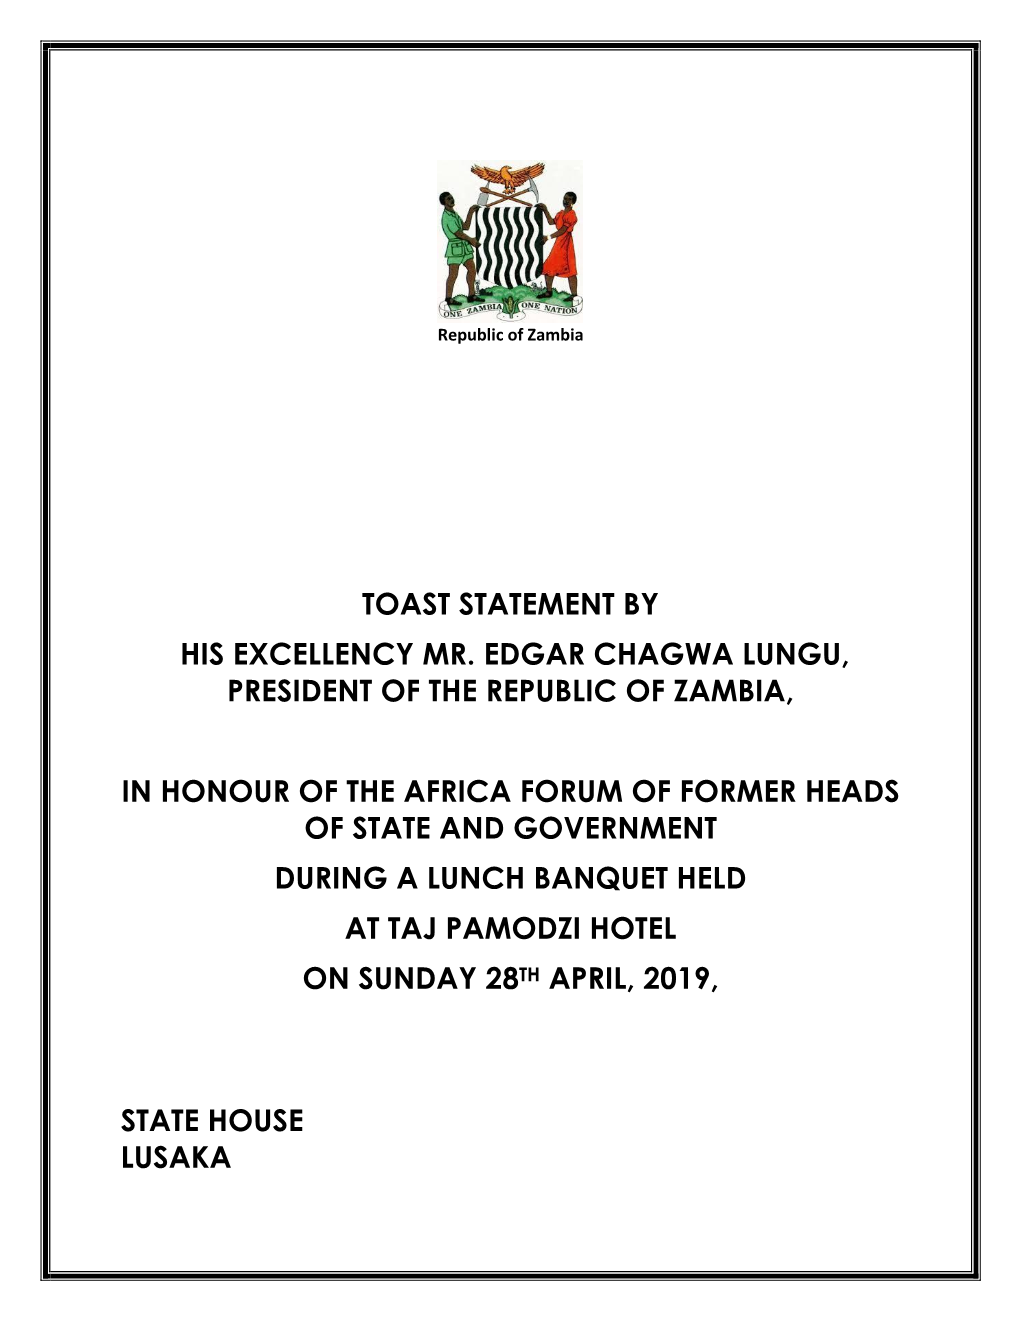 Toast Statement by His Excellency Mr. Edgar Chagwa Lungu, President of the Republic of Zambia, in Honour of the Africa Forum Of